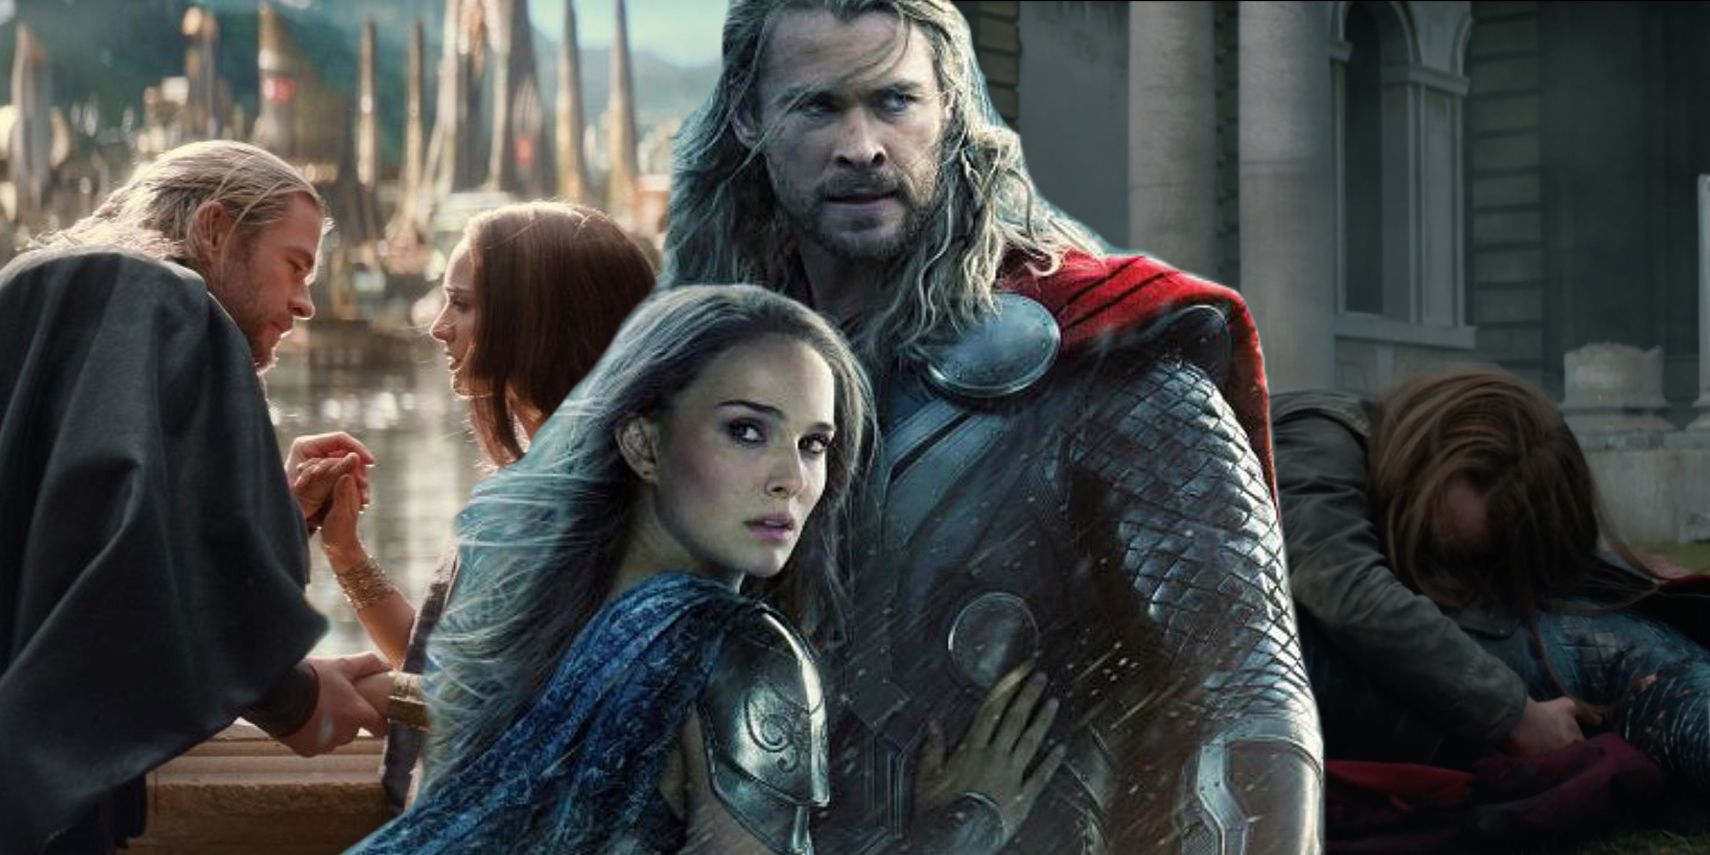 Love And Thunder: Scenes From Thor and Jane's Break Up